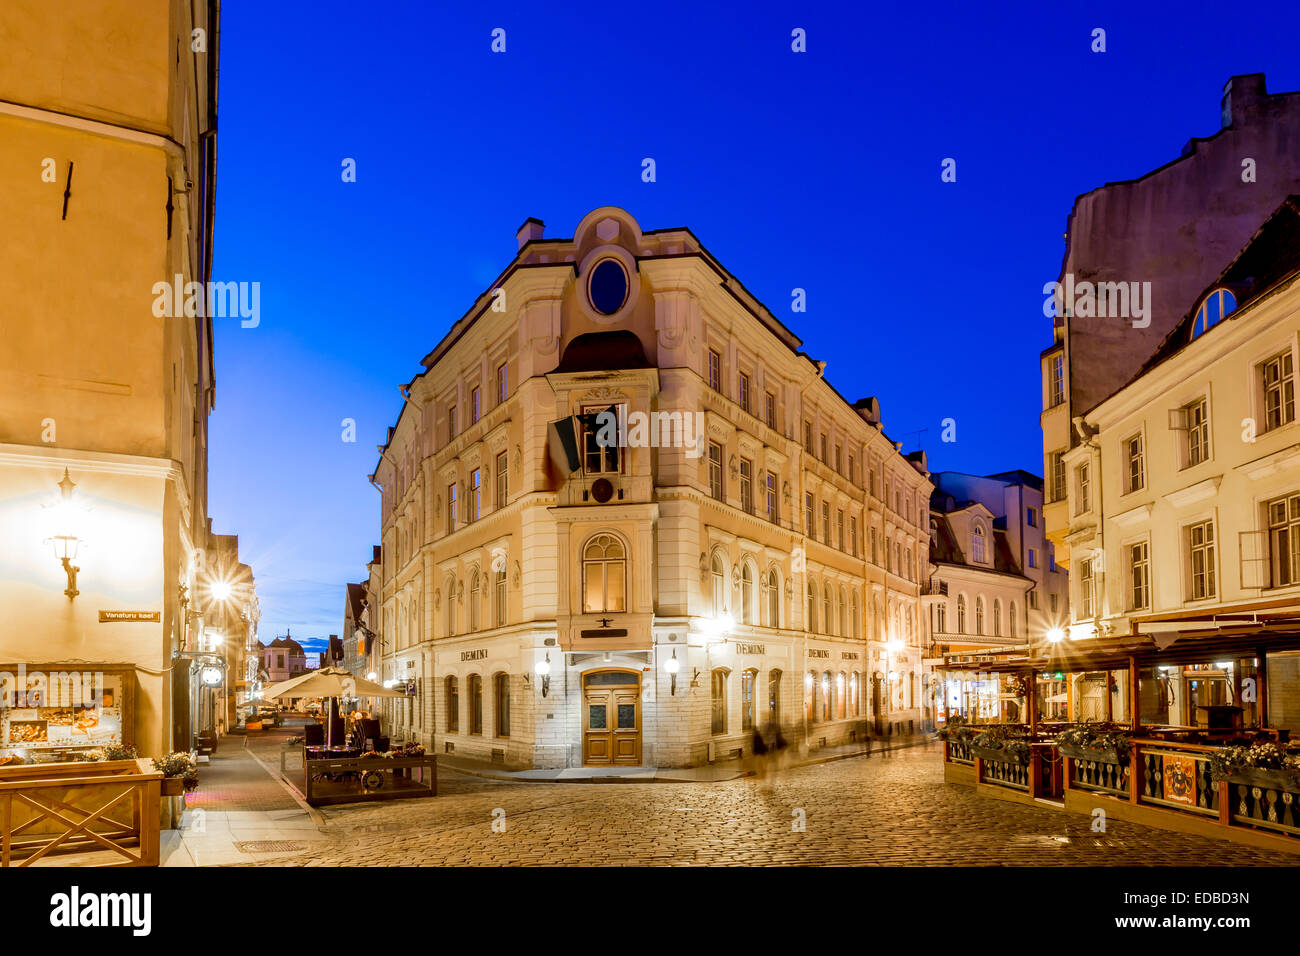 Old square or Varna trug in the old town at night, Tallinn, Estonia Stock Photo